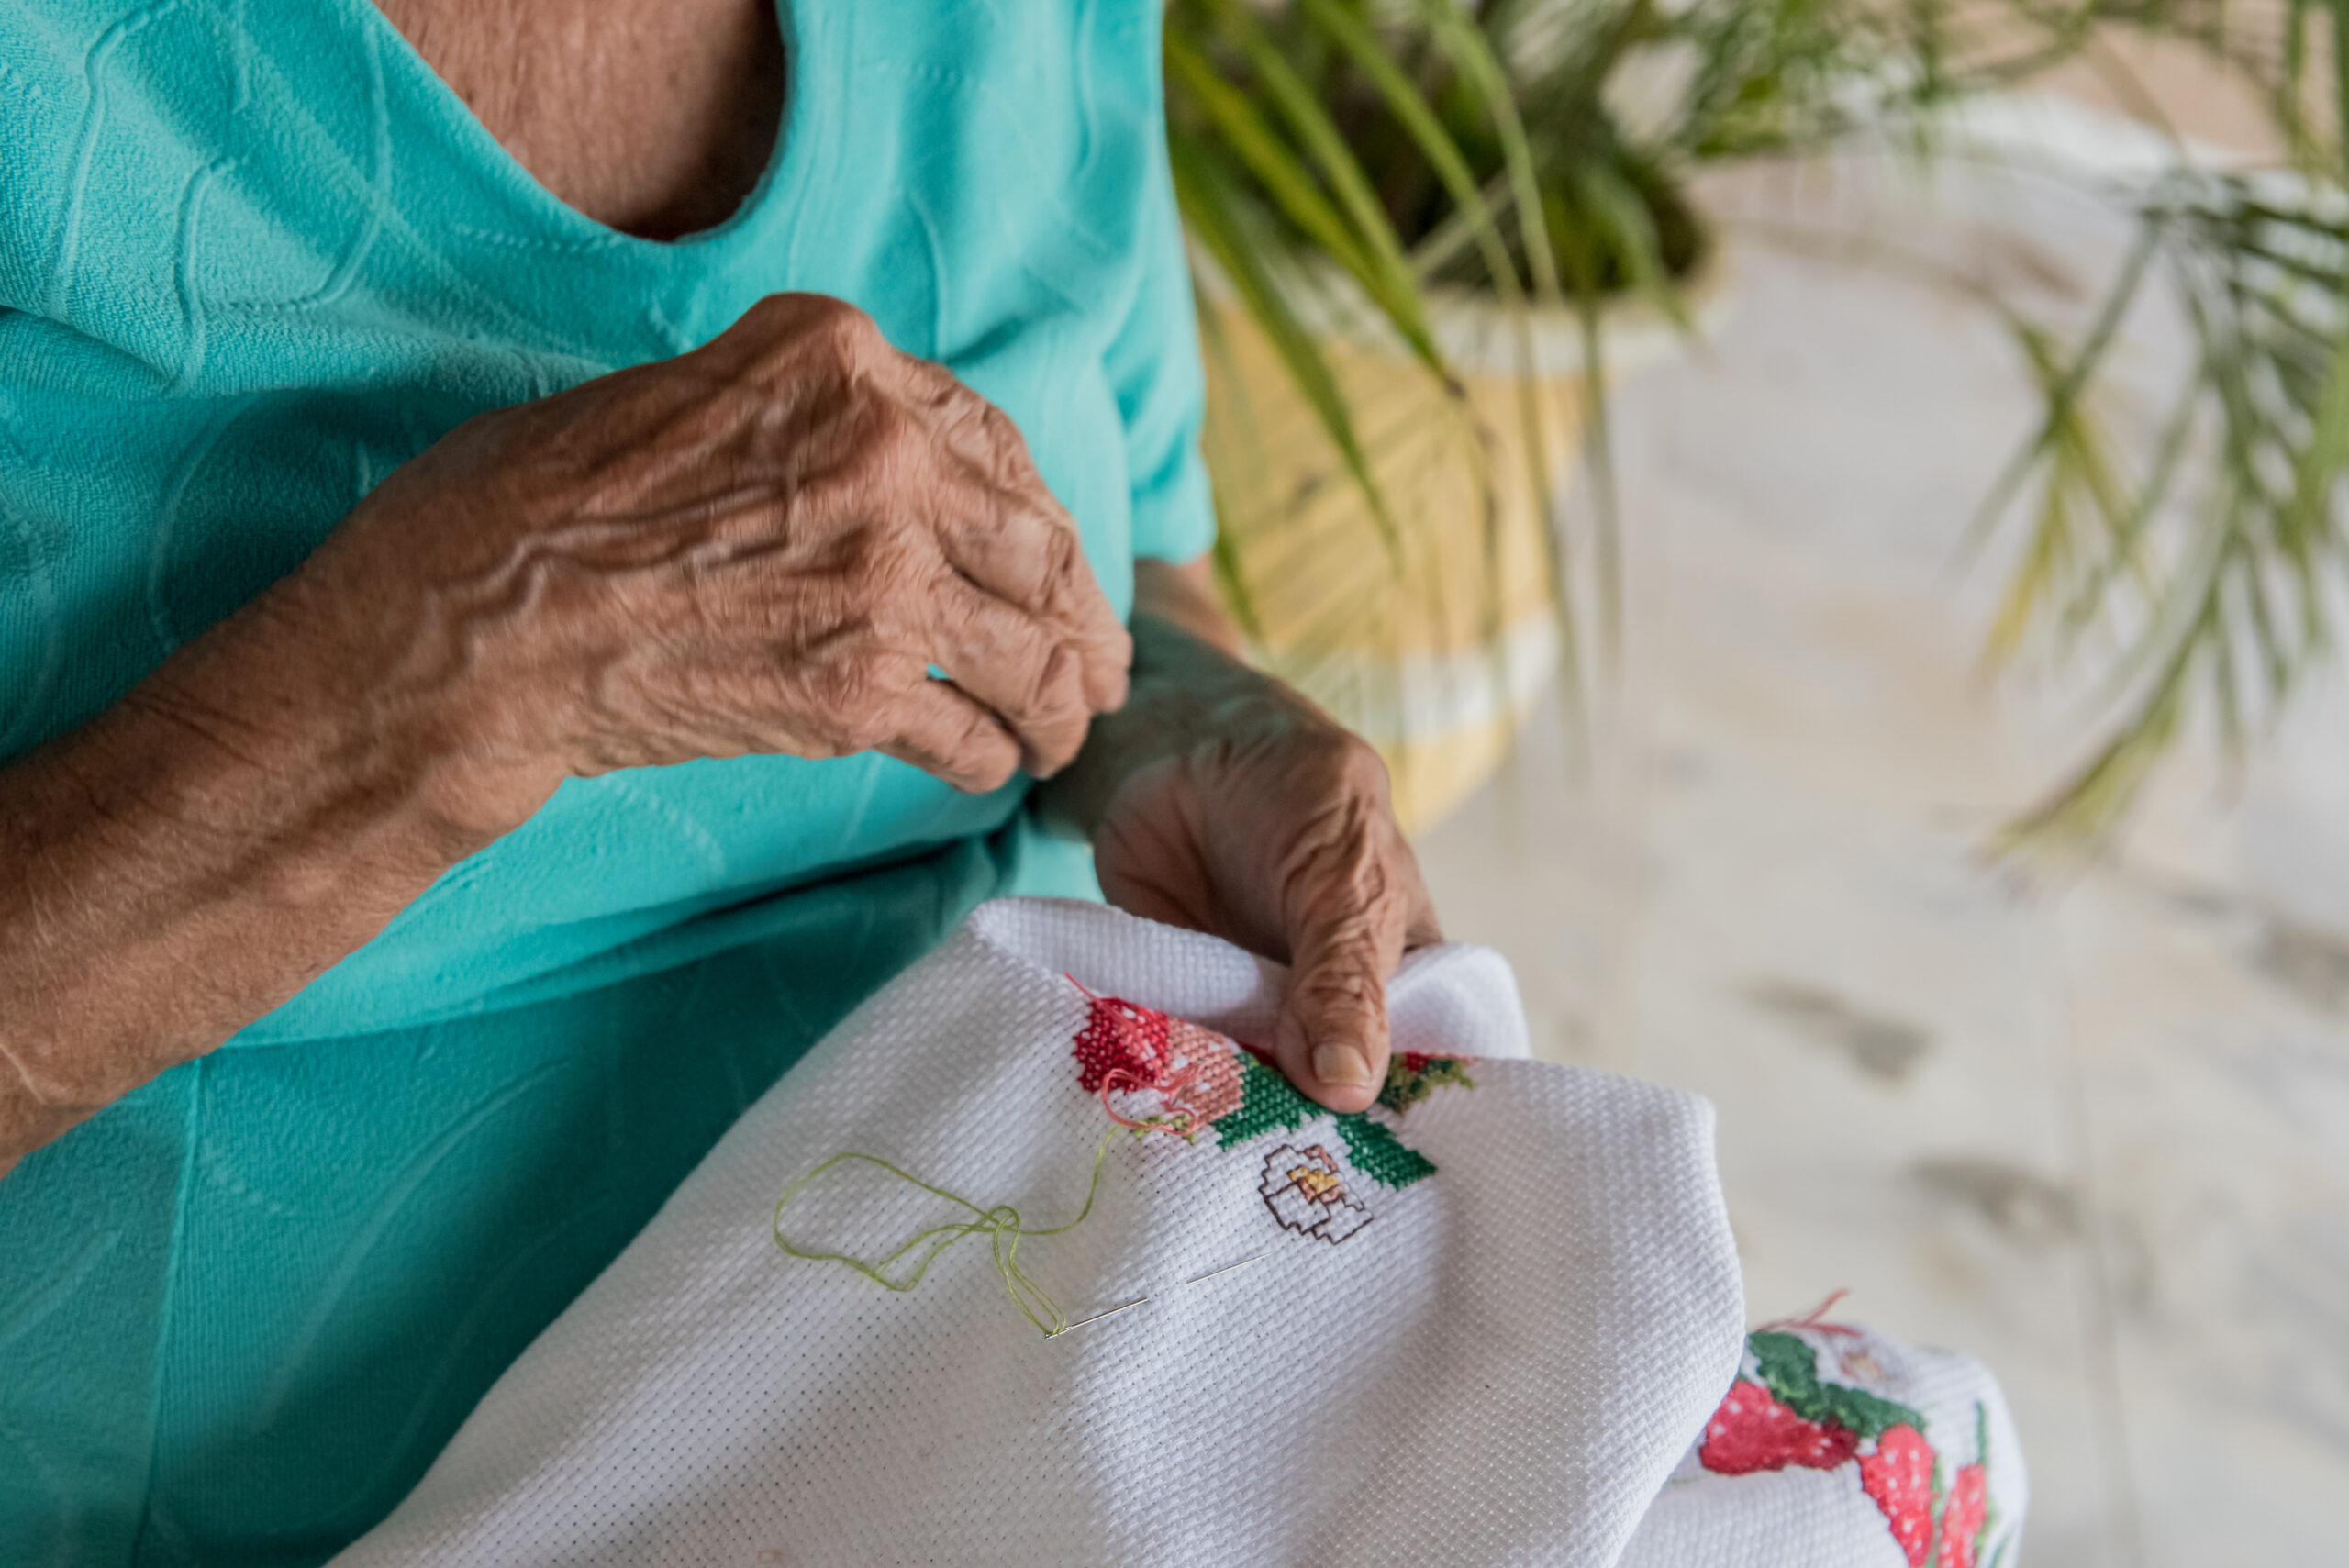 elderly person practicing expressive art therapy embroidering flowers on a fabric